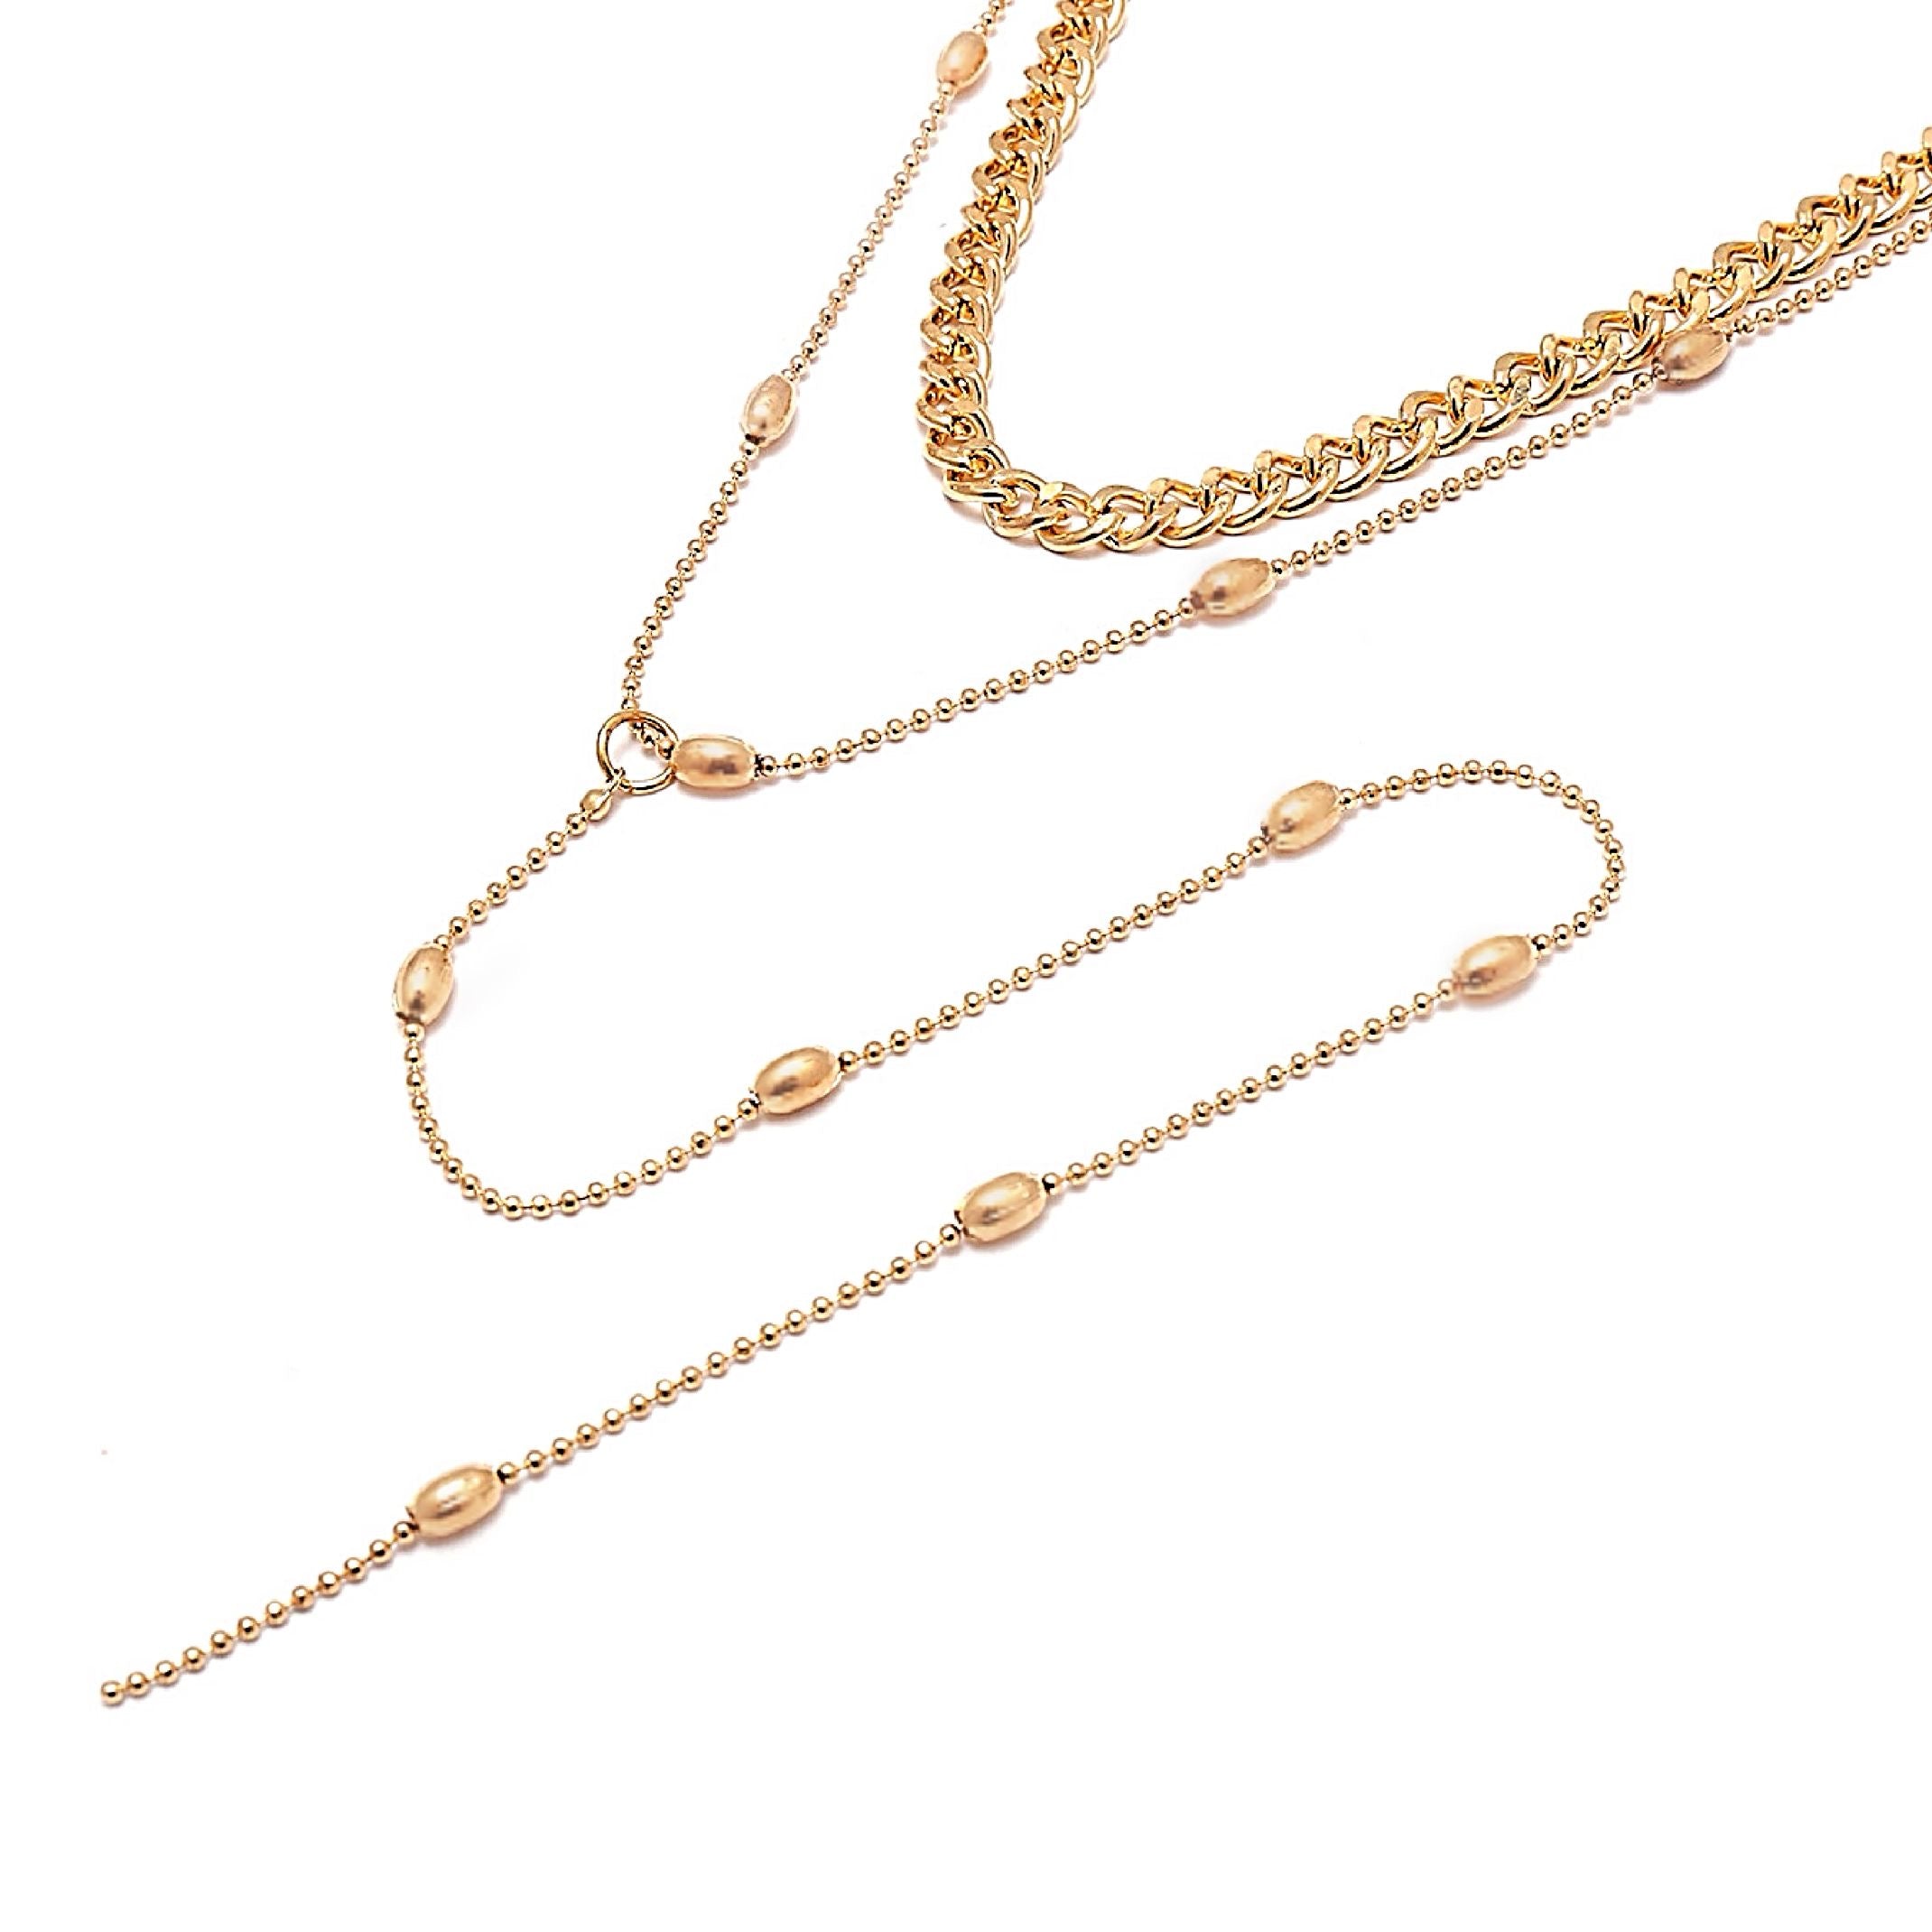 Gold bead layered chains 